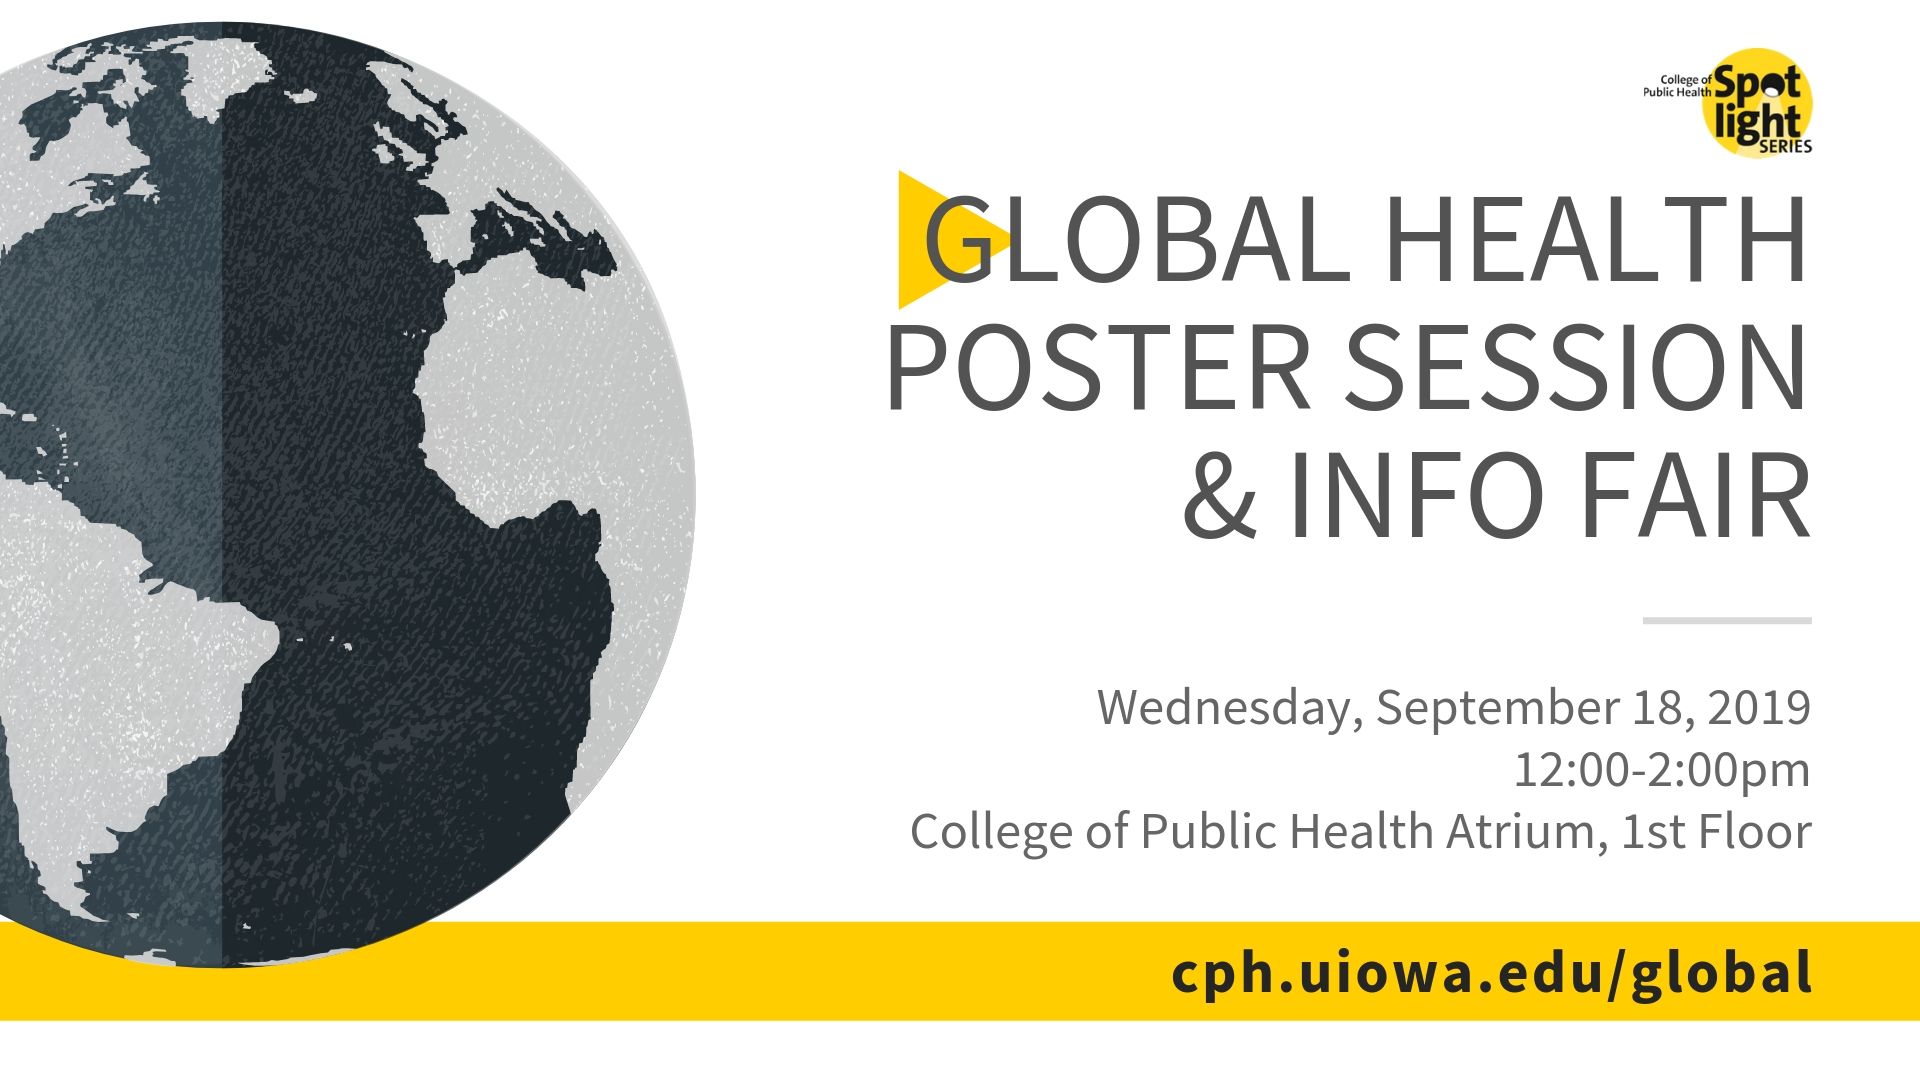 Global Health Poster Session and Information Fair promotional image